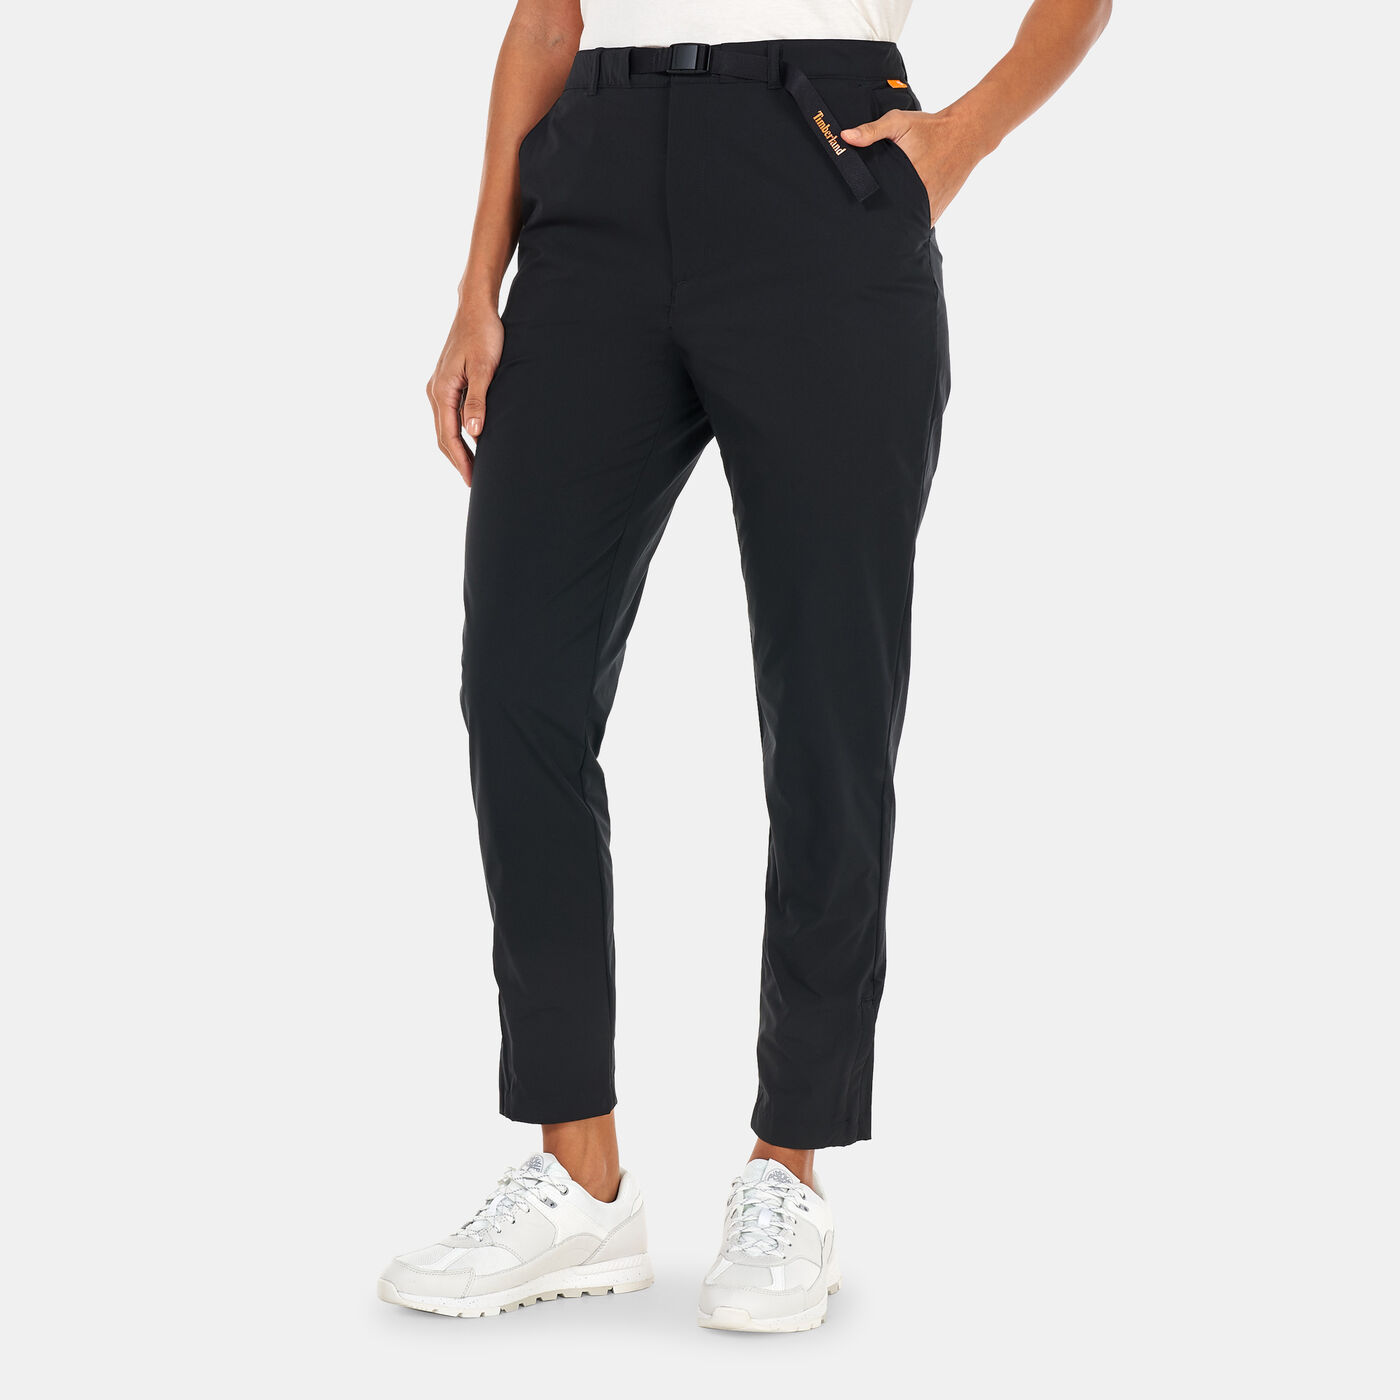 Women's Water-Resistant Cropped Pants